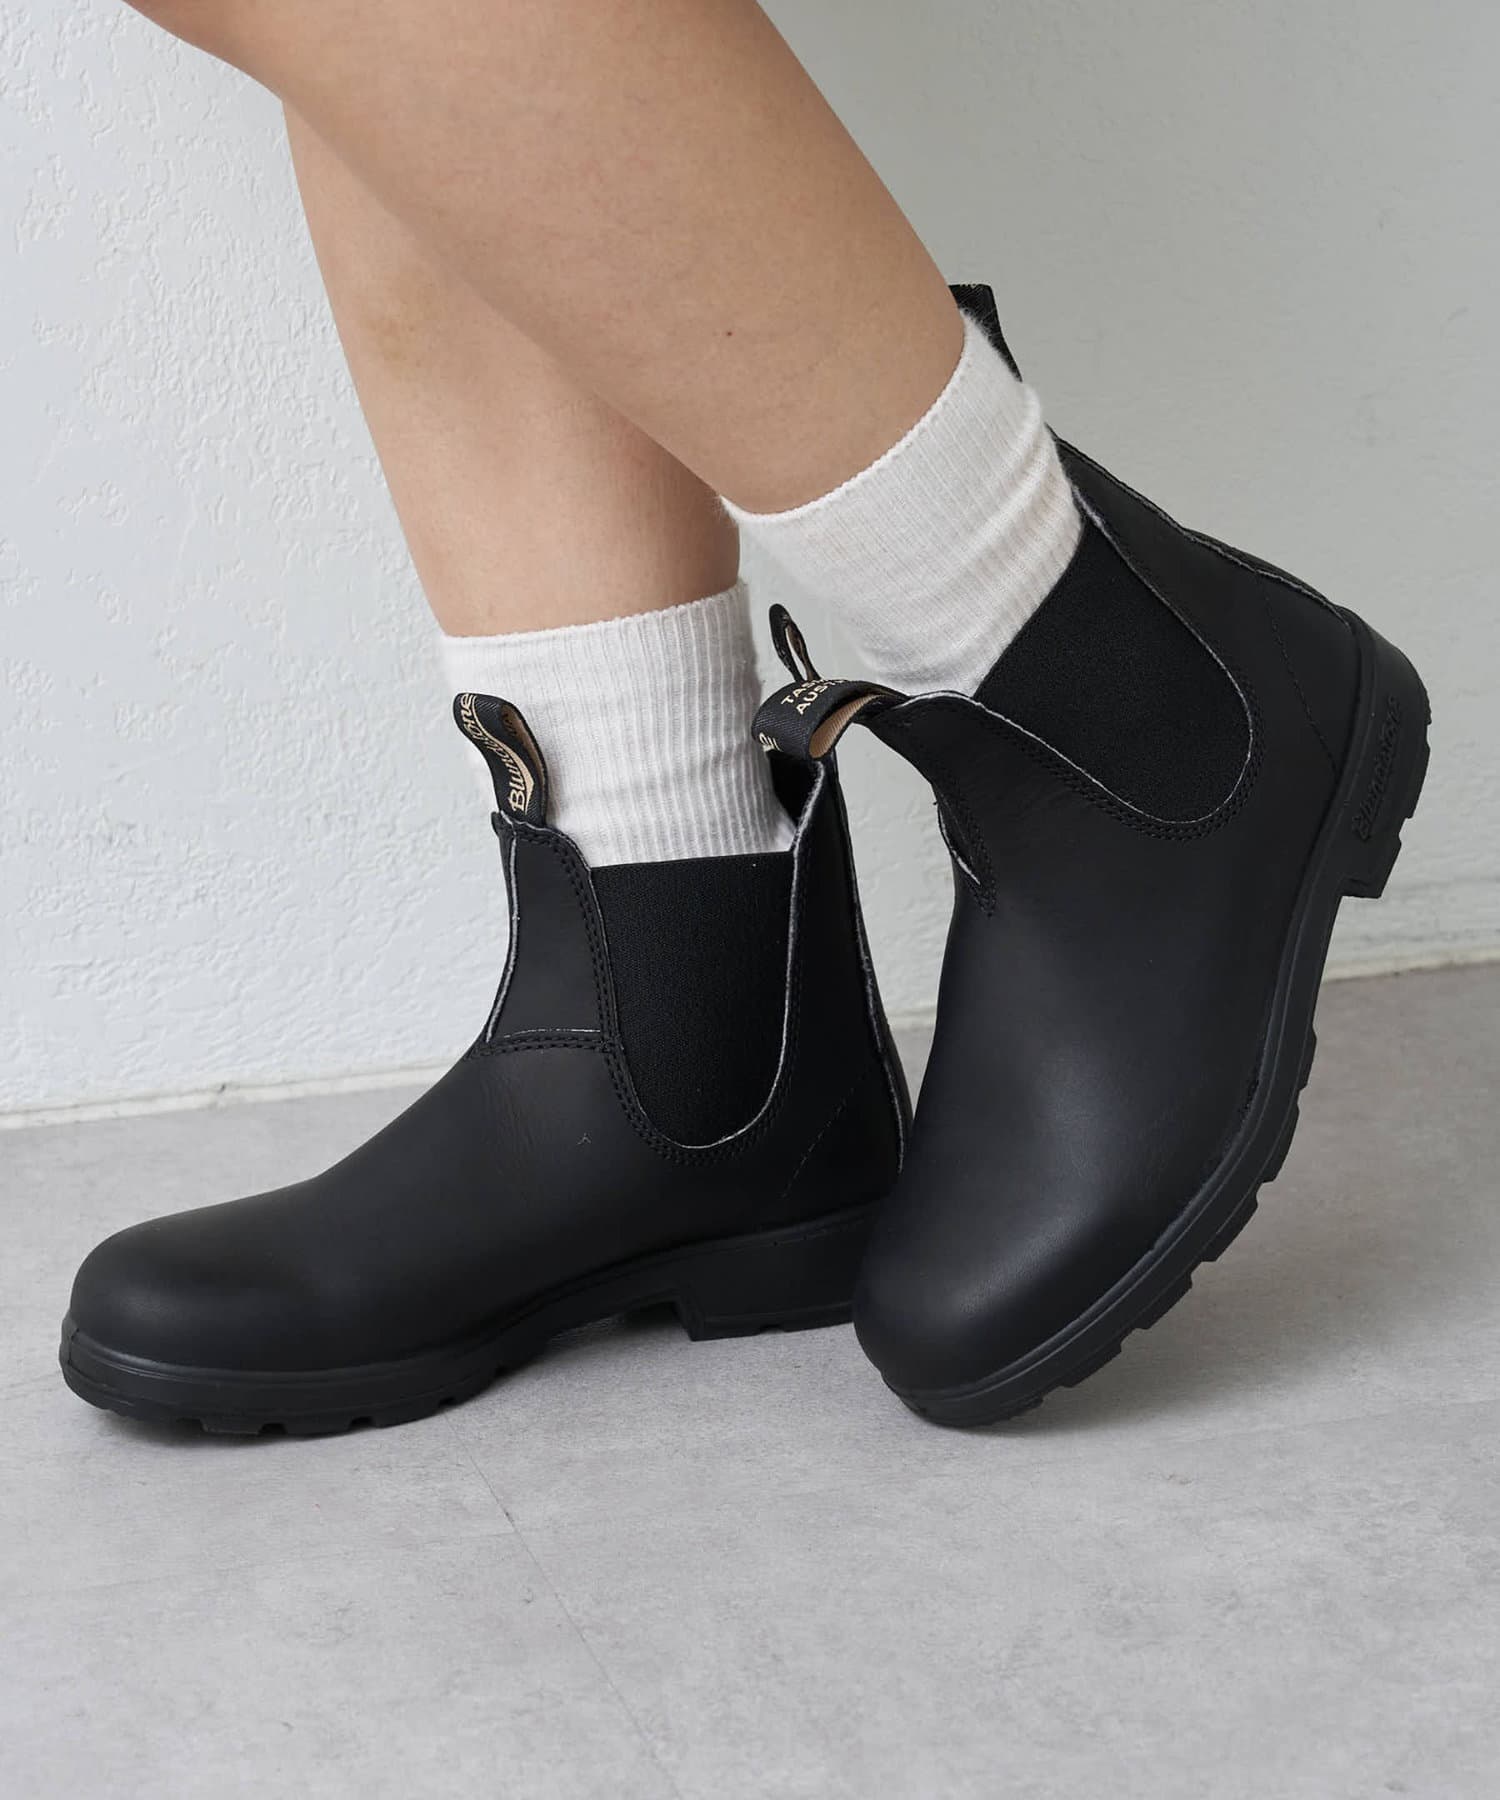 Blundstone】BS510 SIDE GORE BOOTS | CIAOPANIC TYPY(チャオパニック